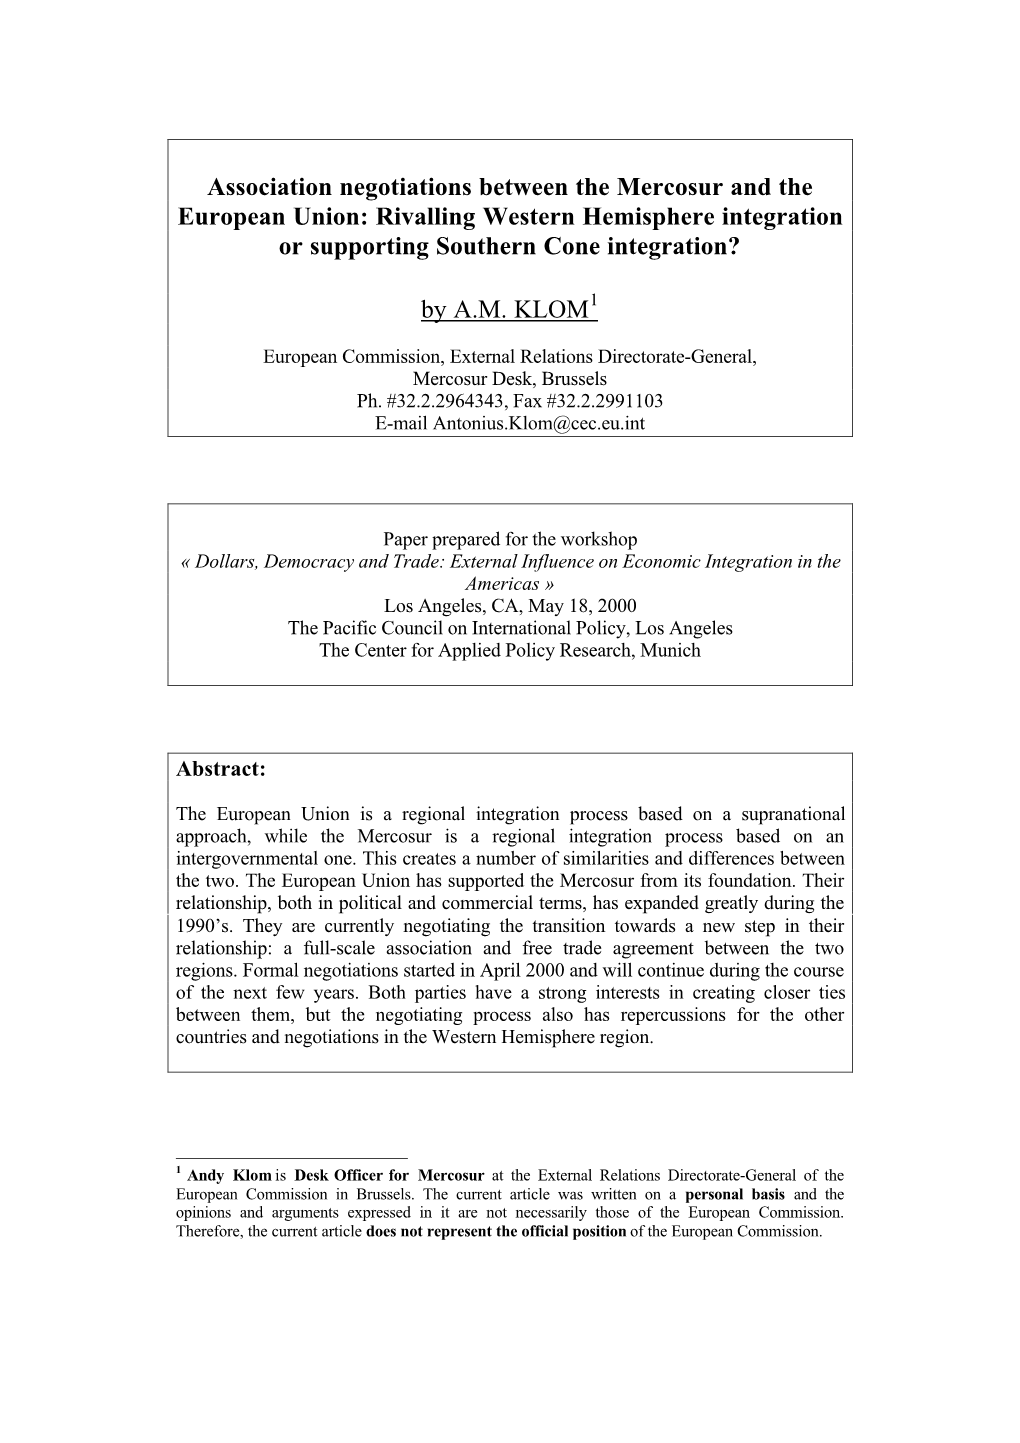 Association Negotiations Between the Mercosur and the European Union: Rivalling Western Hemisphere Integration Or Supporting Southern Cone Integration?